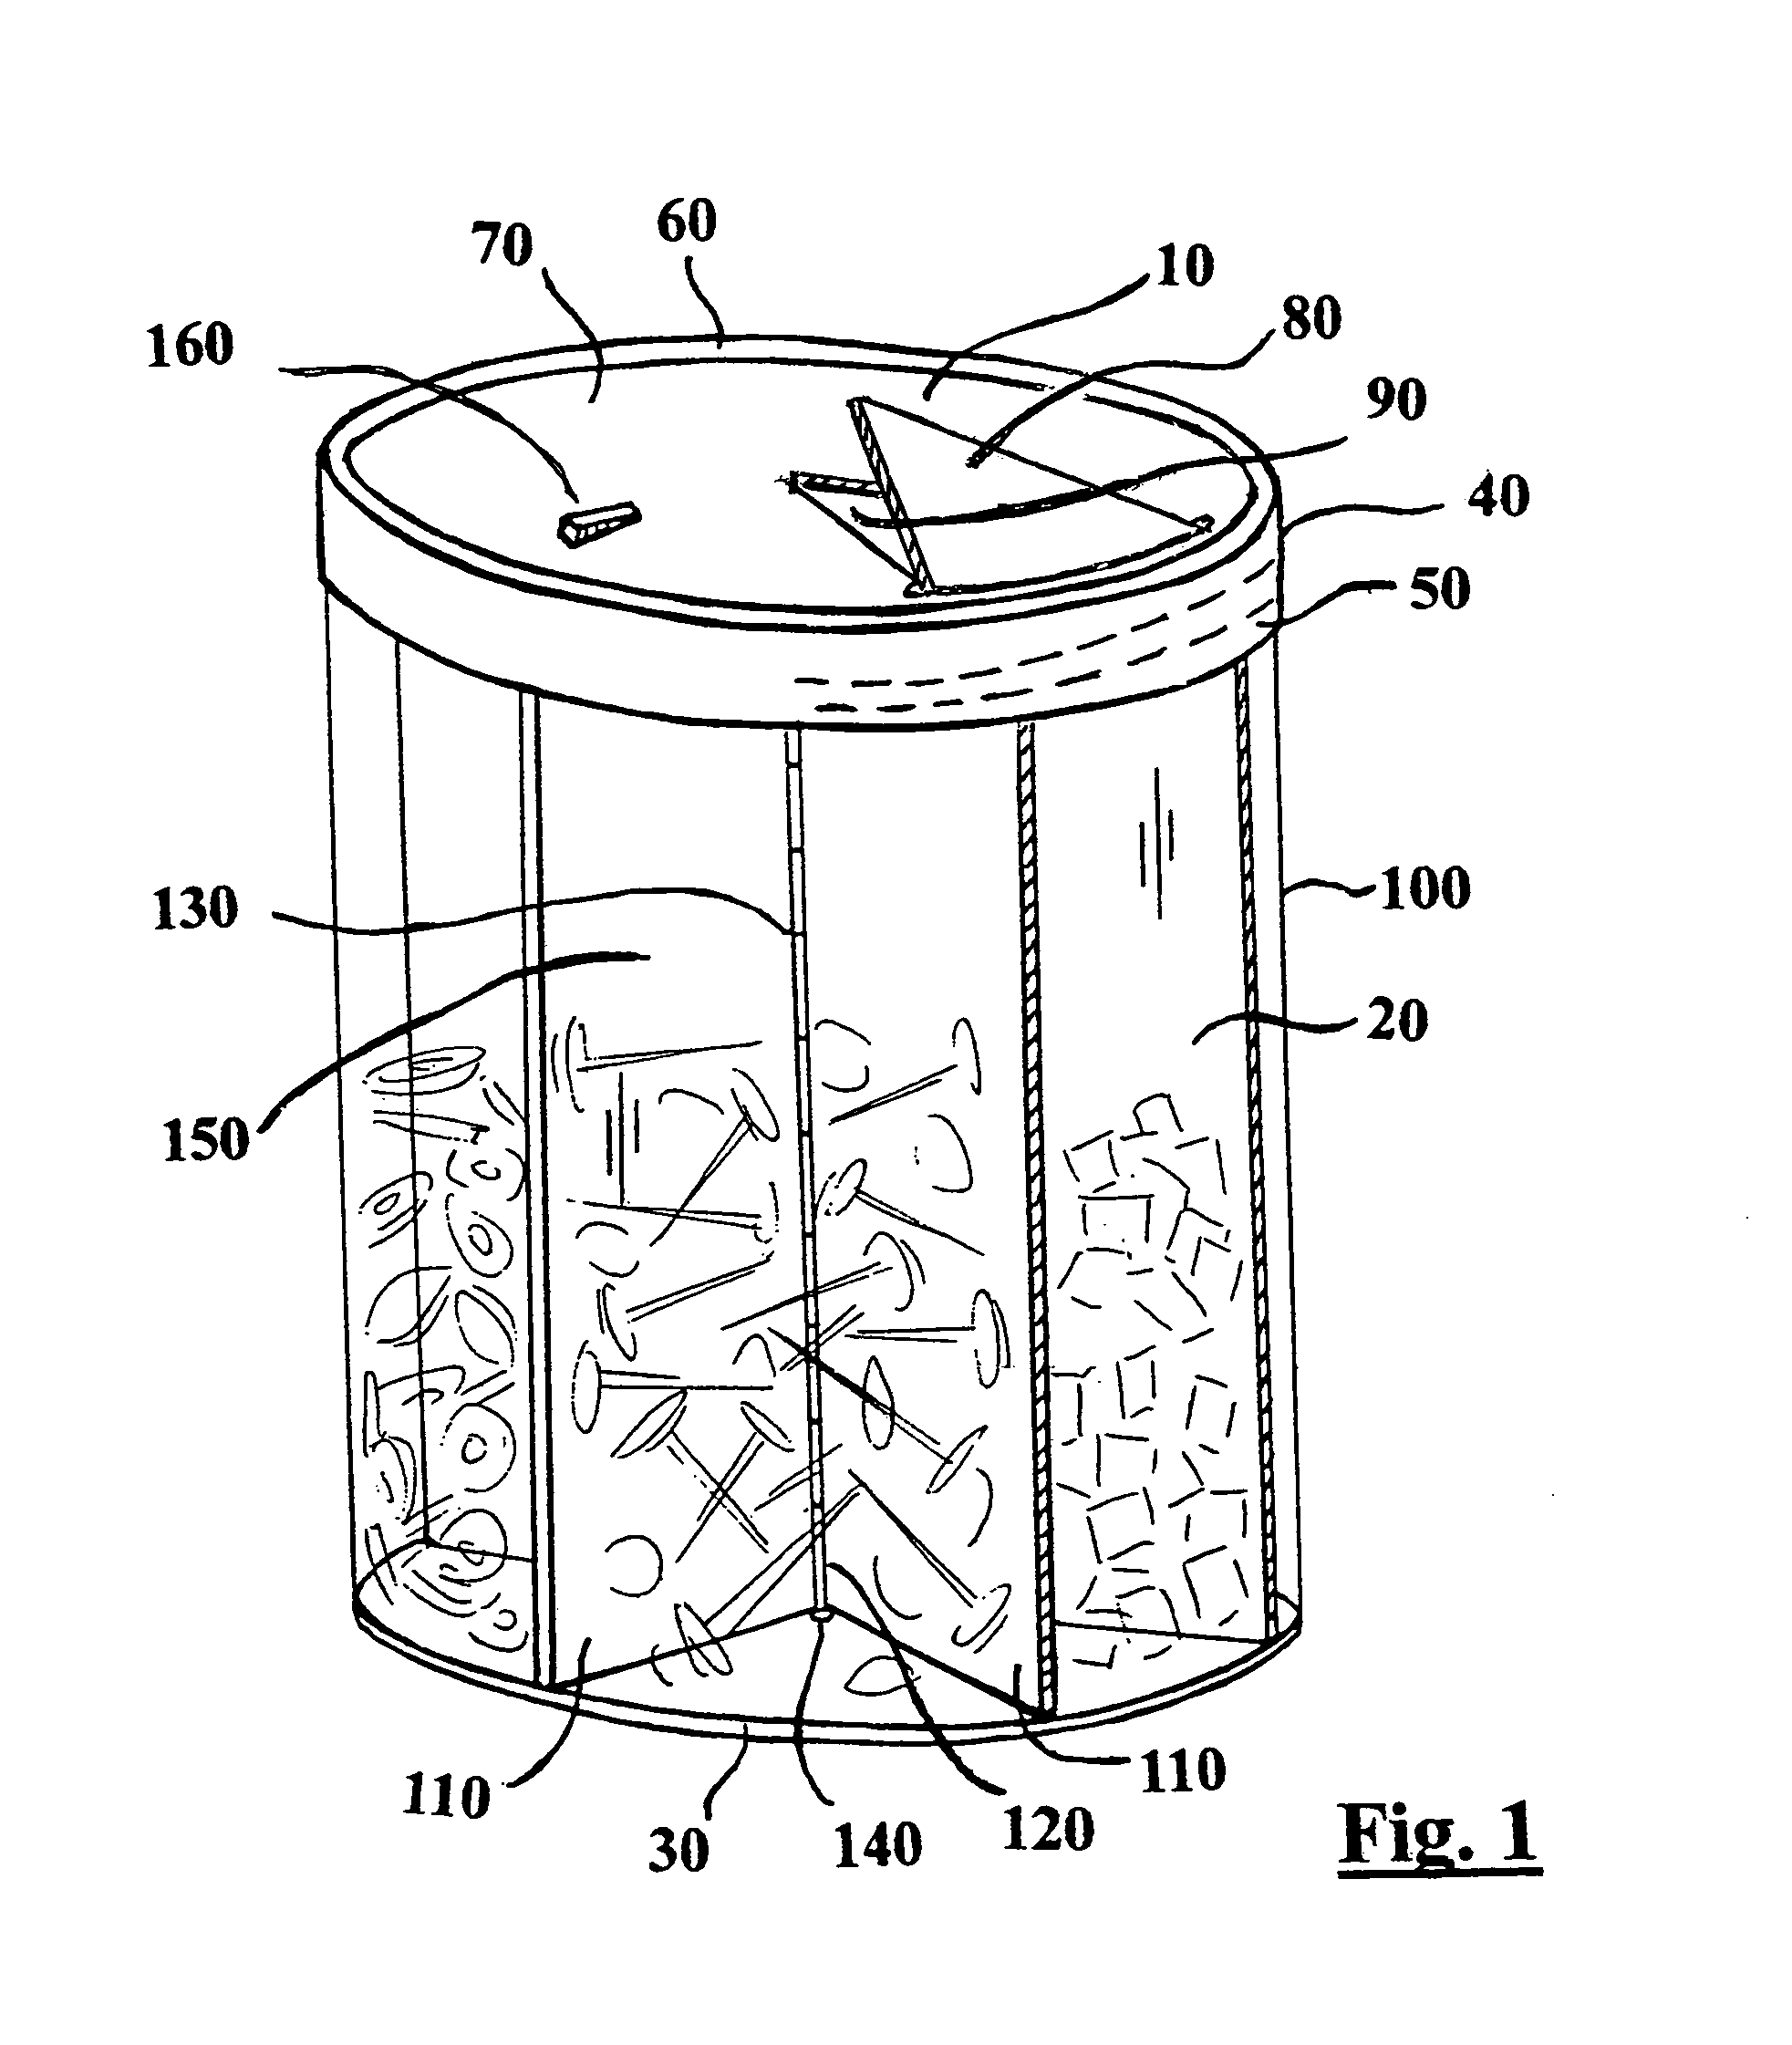 Self-adjusting container